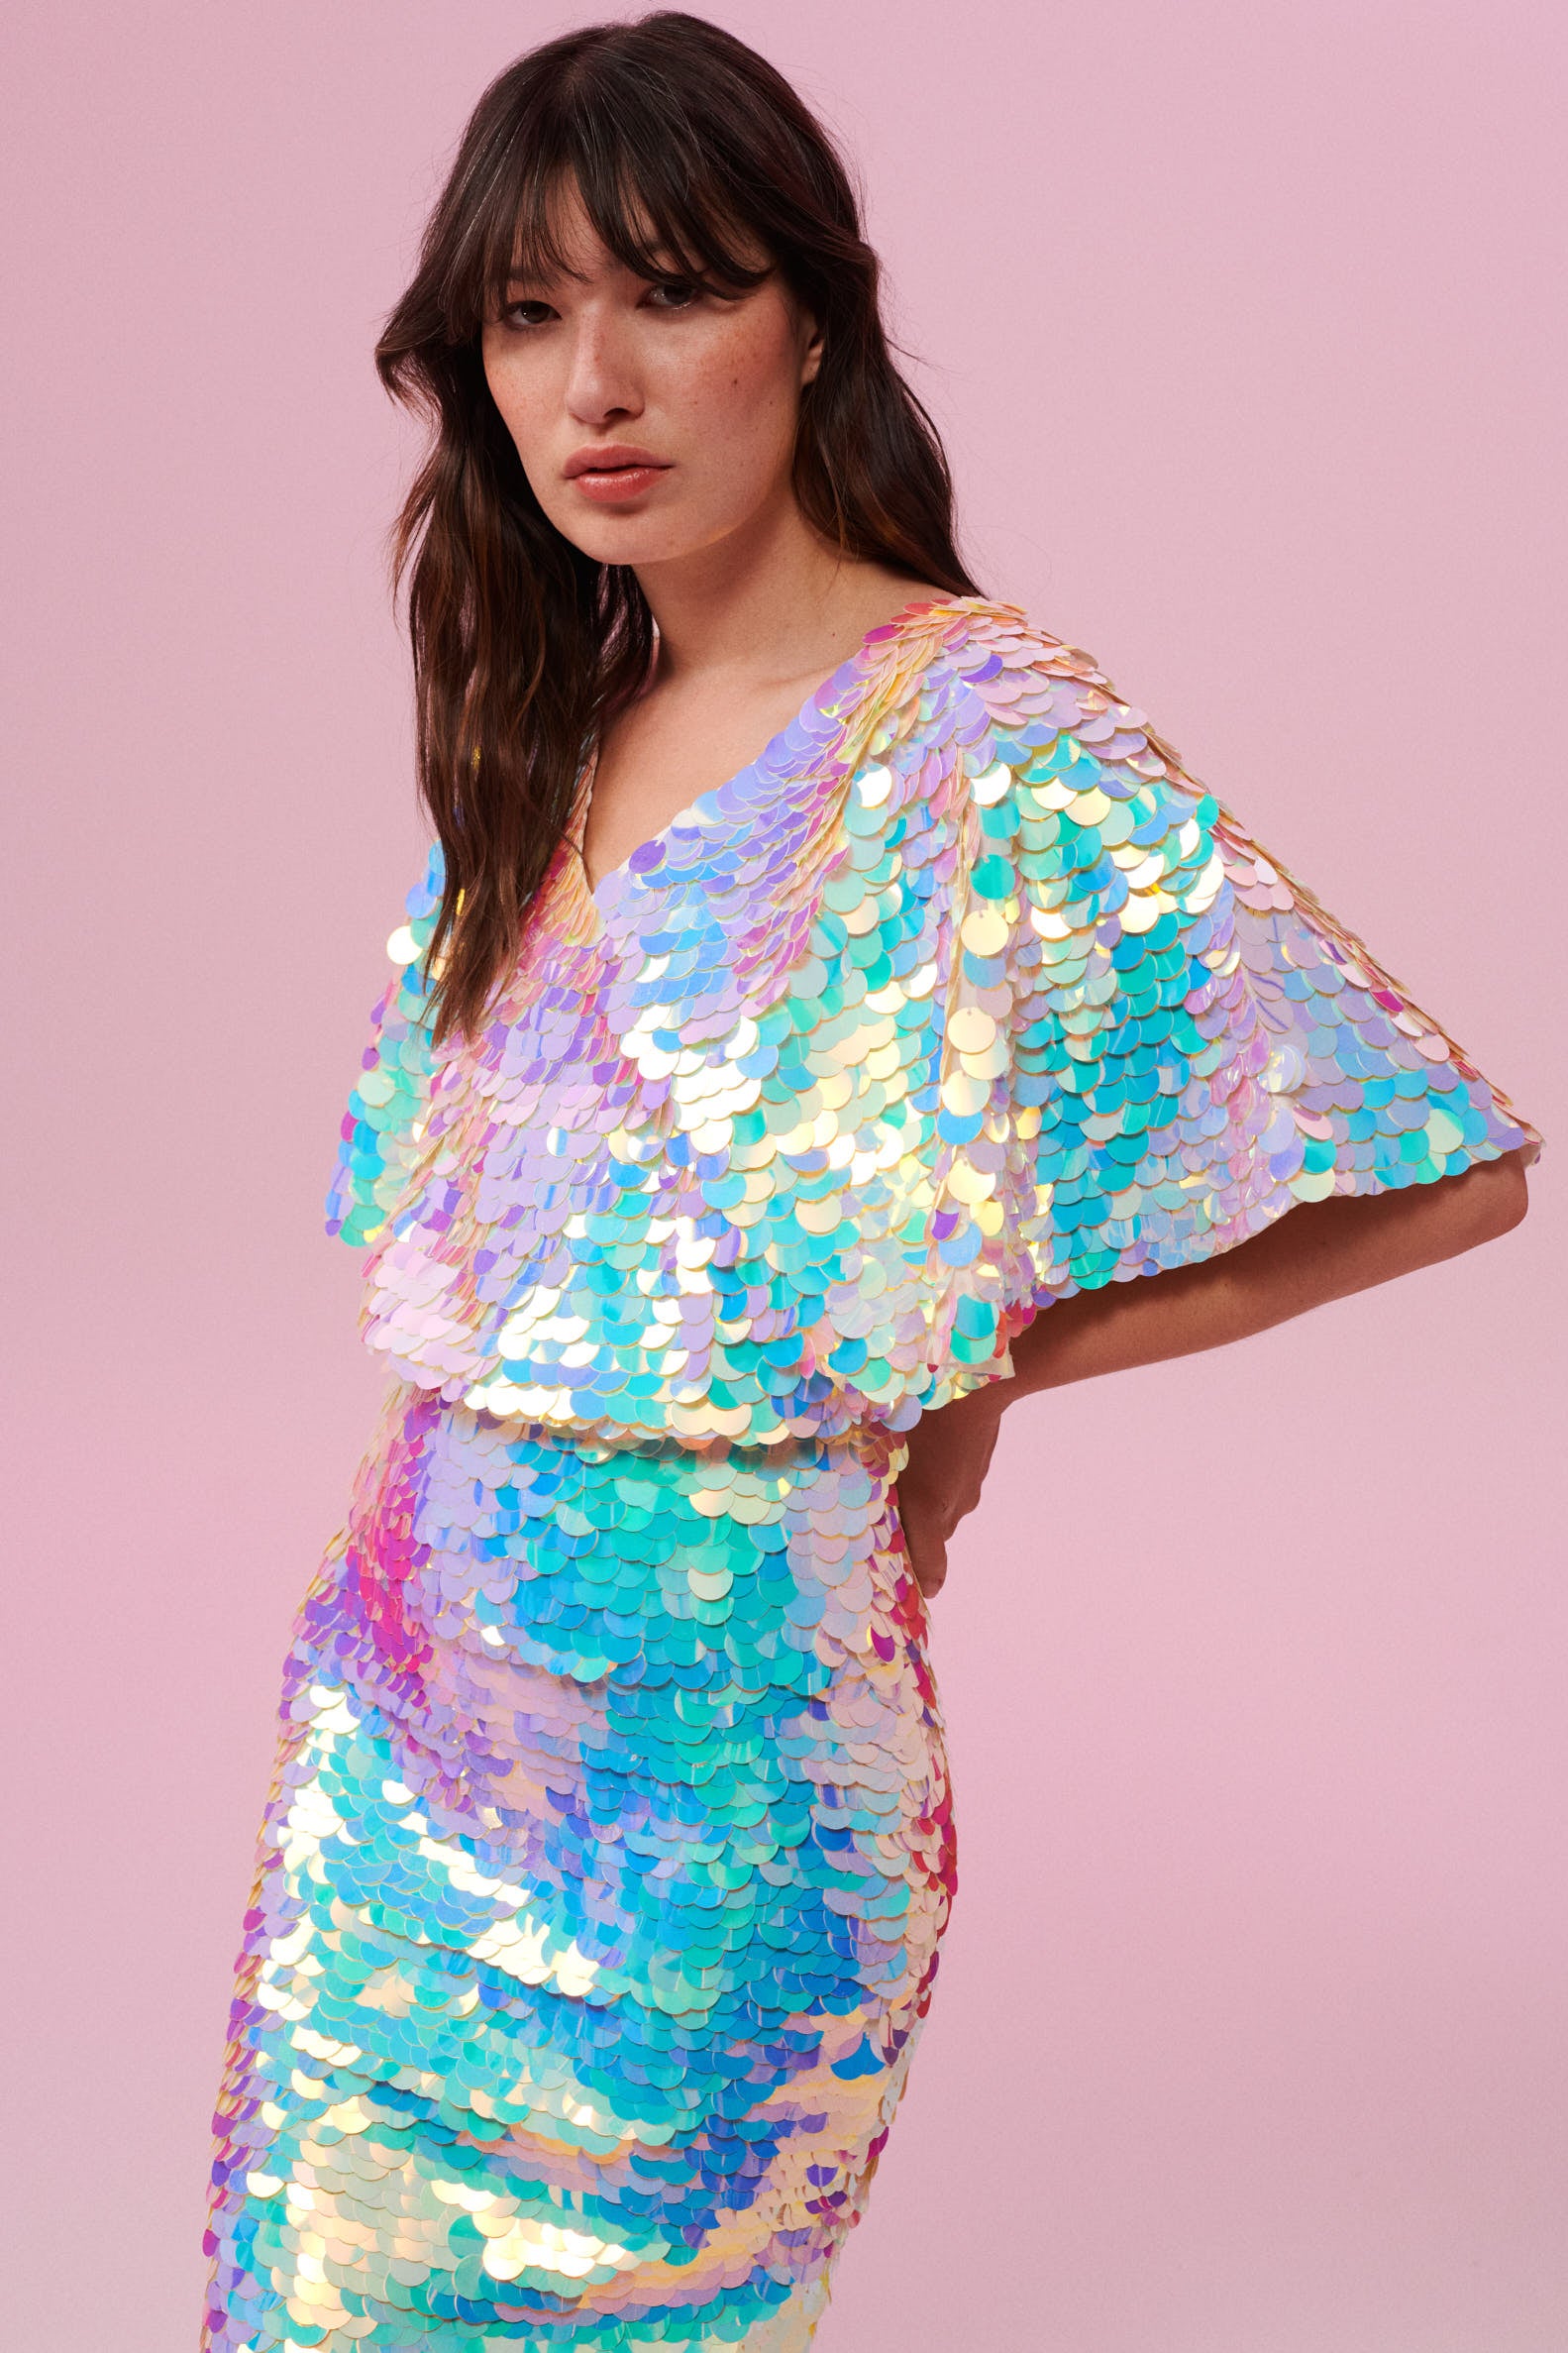 A woman facing towards you at an angle wearing an opal sequin top with large cape sleeves covered in large round holographic purple,pink, blue and white coloured Rosa Bloom sequins.